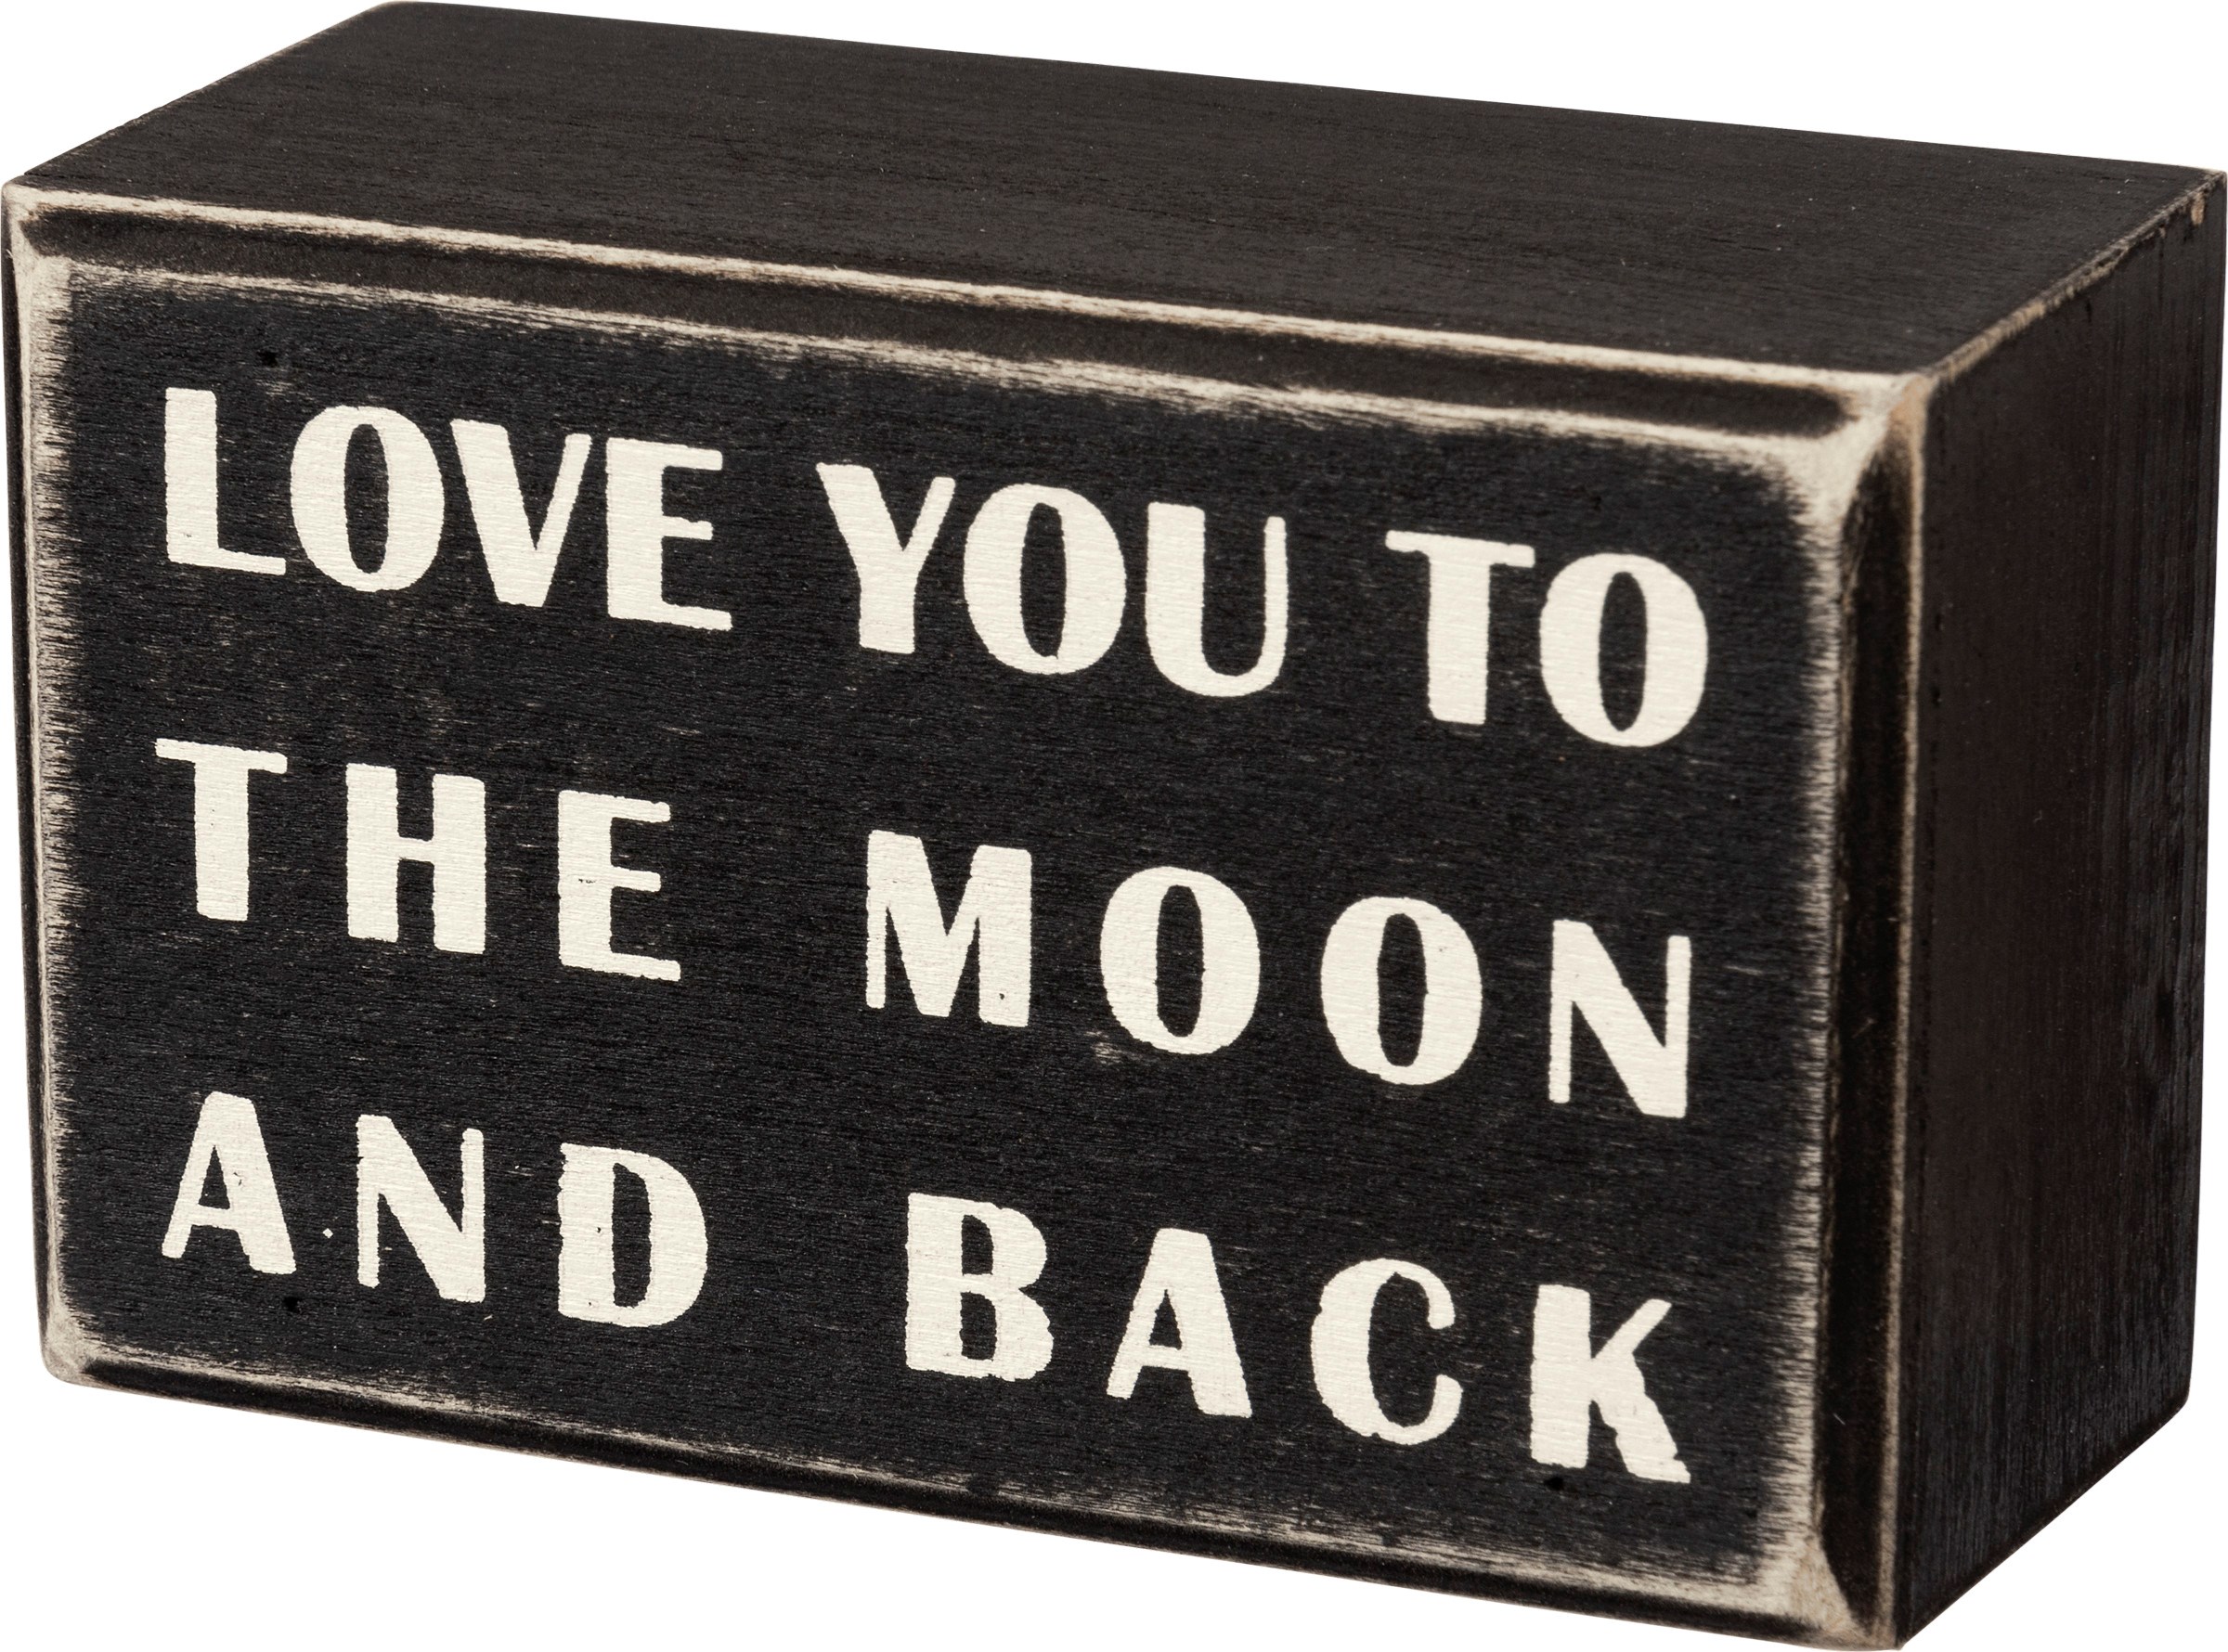 Details about   Love You To The Moon And Back Box Sign String Art Primitives by Kathy